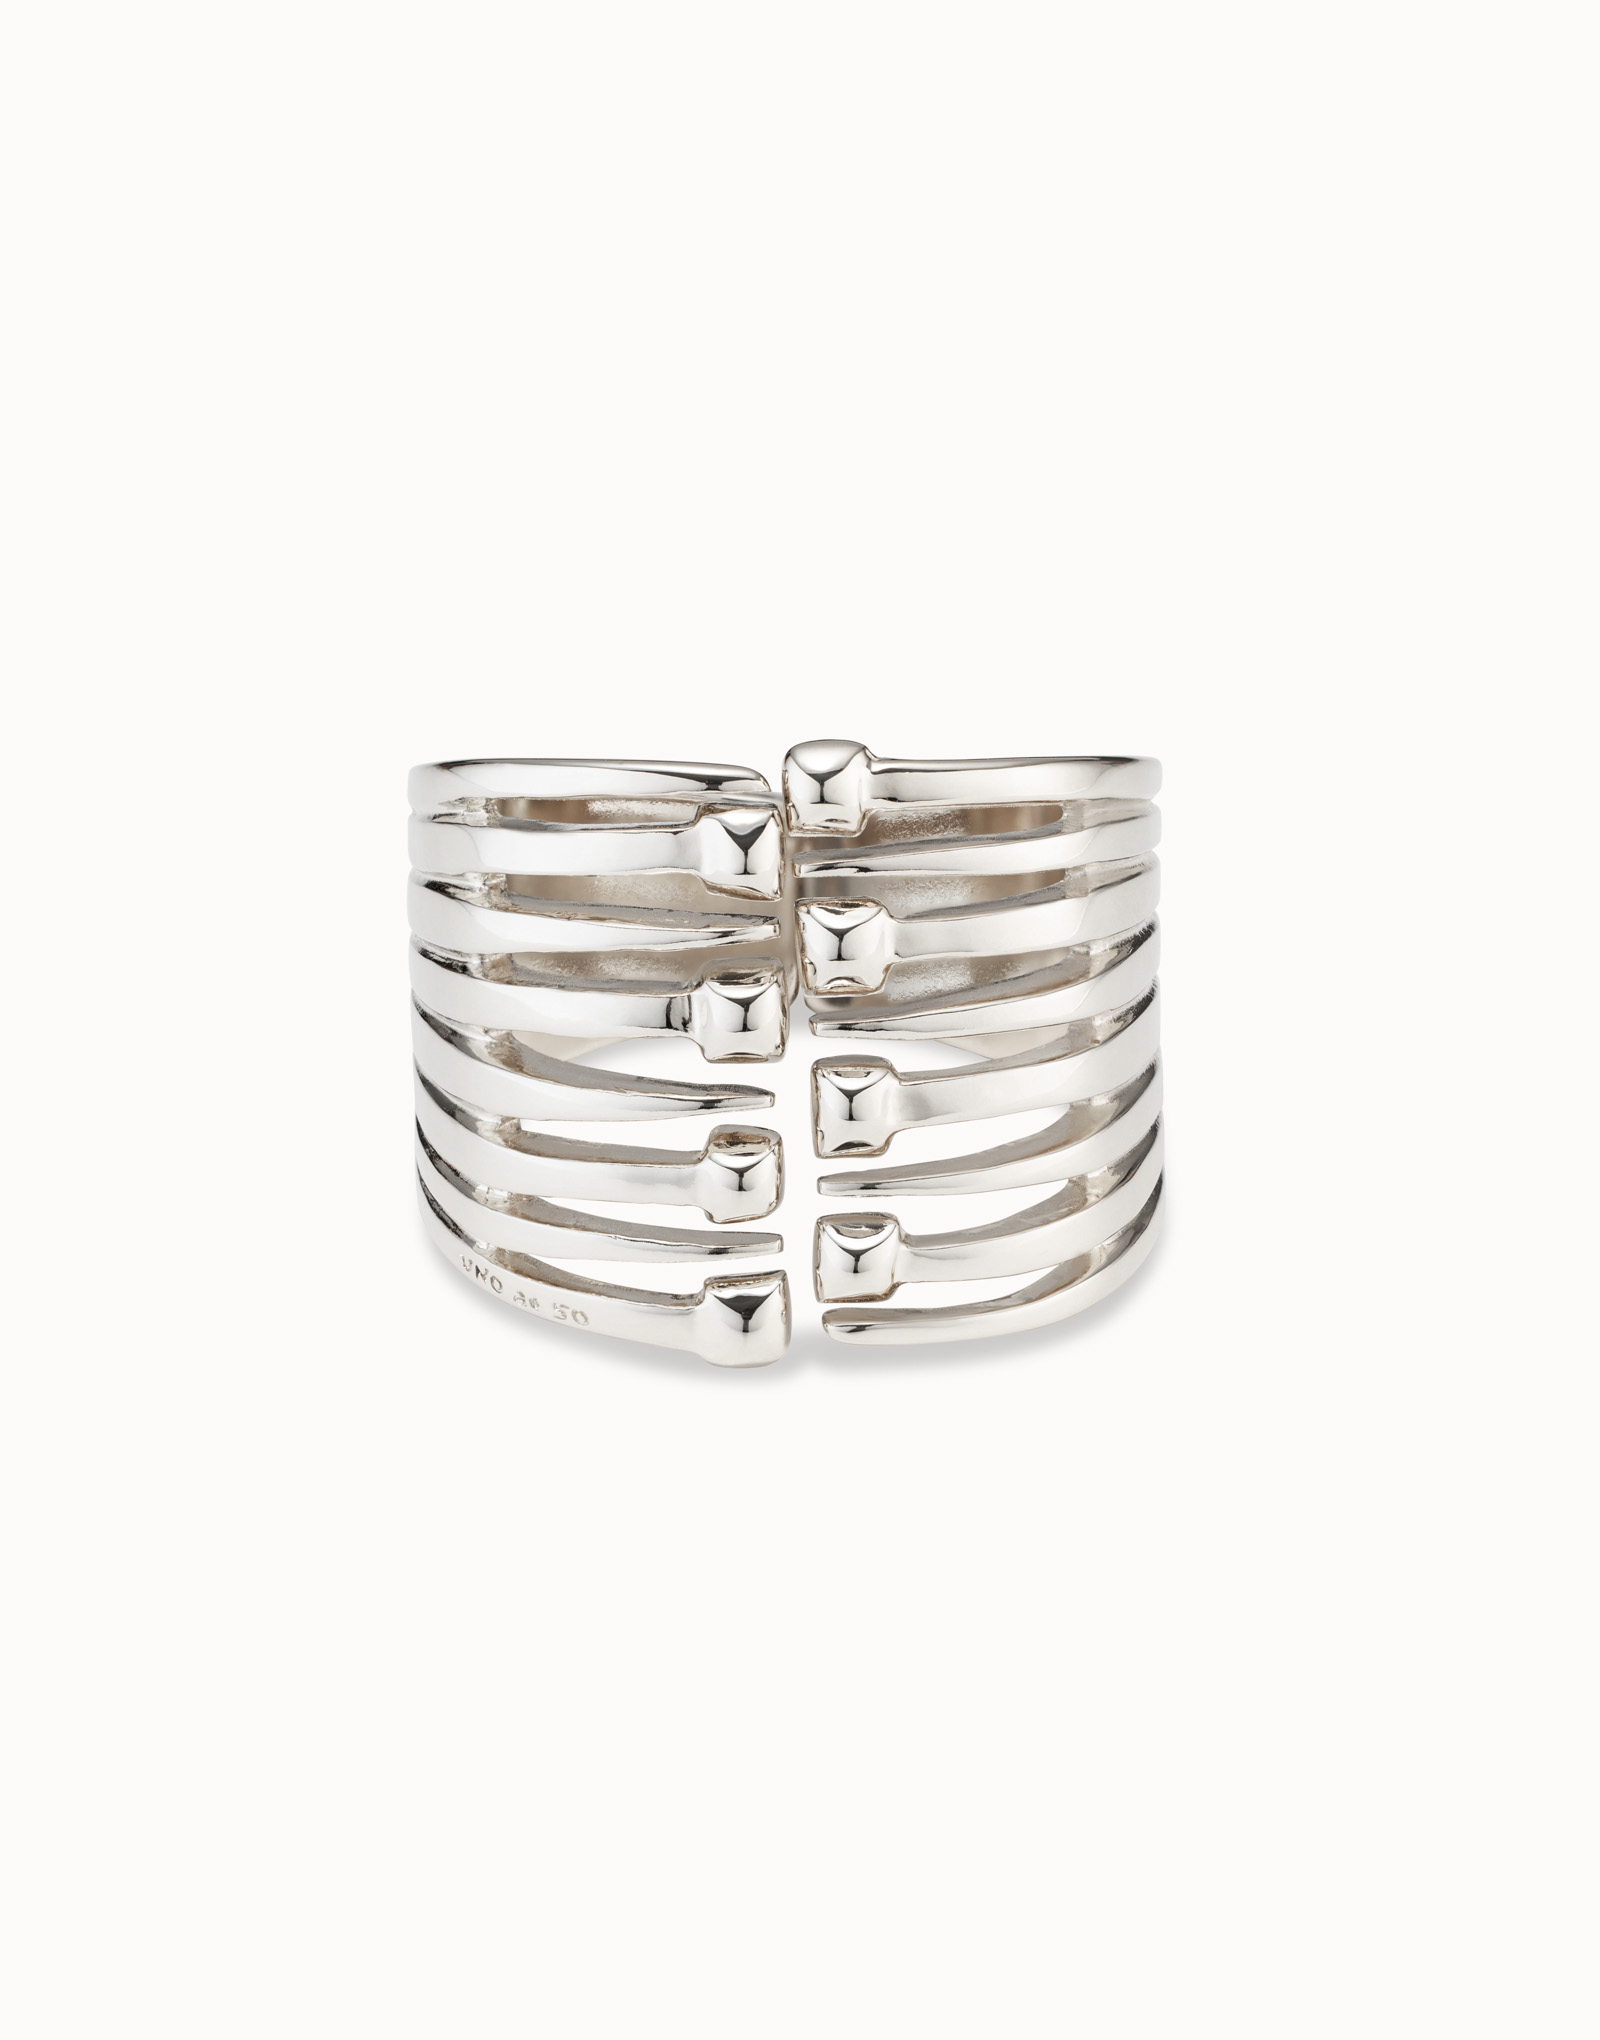 Bracciale placcato argento Sterling con varie teste di chiodo, Argent, large image number null